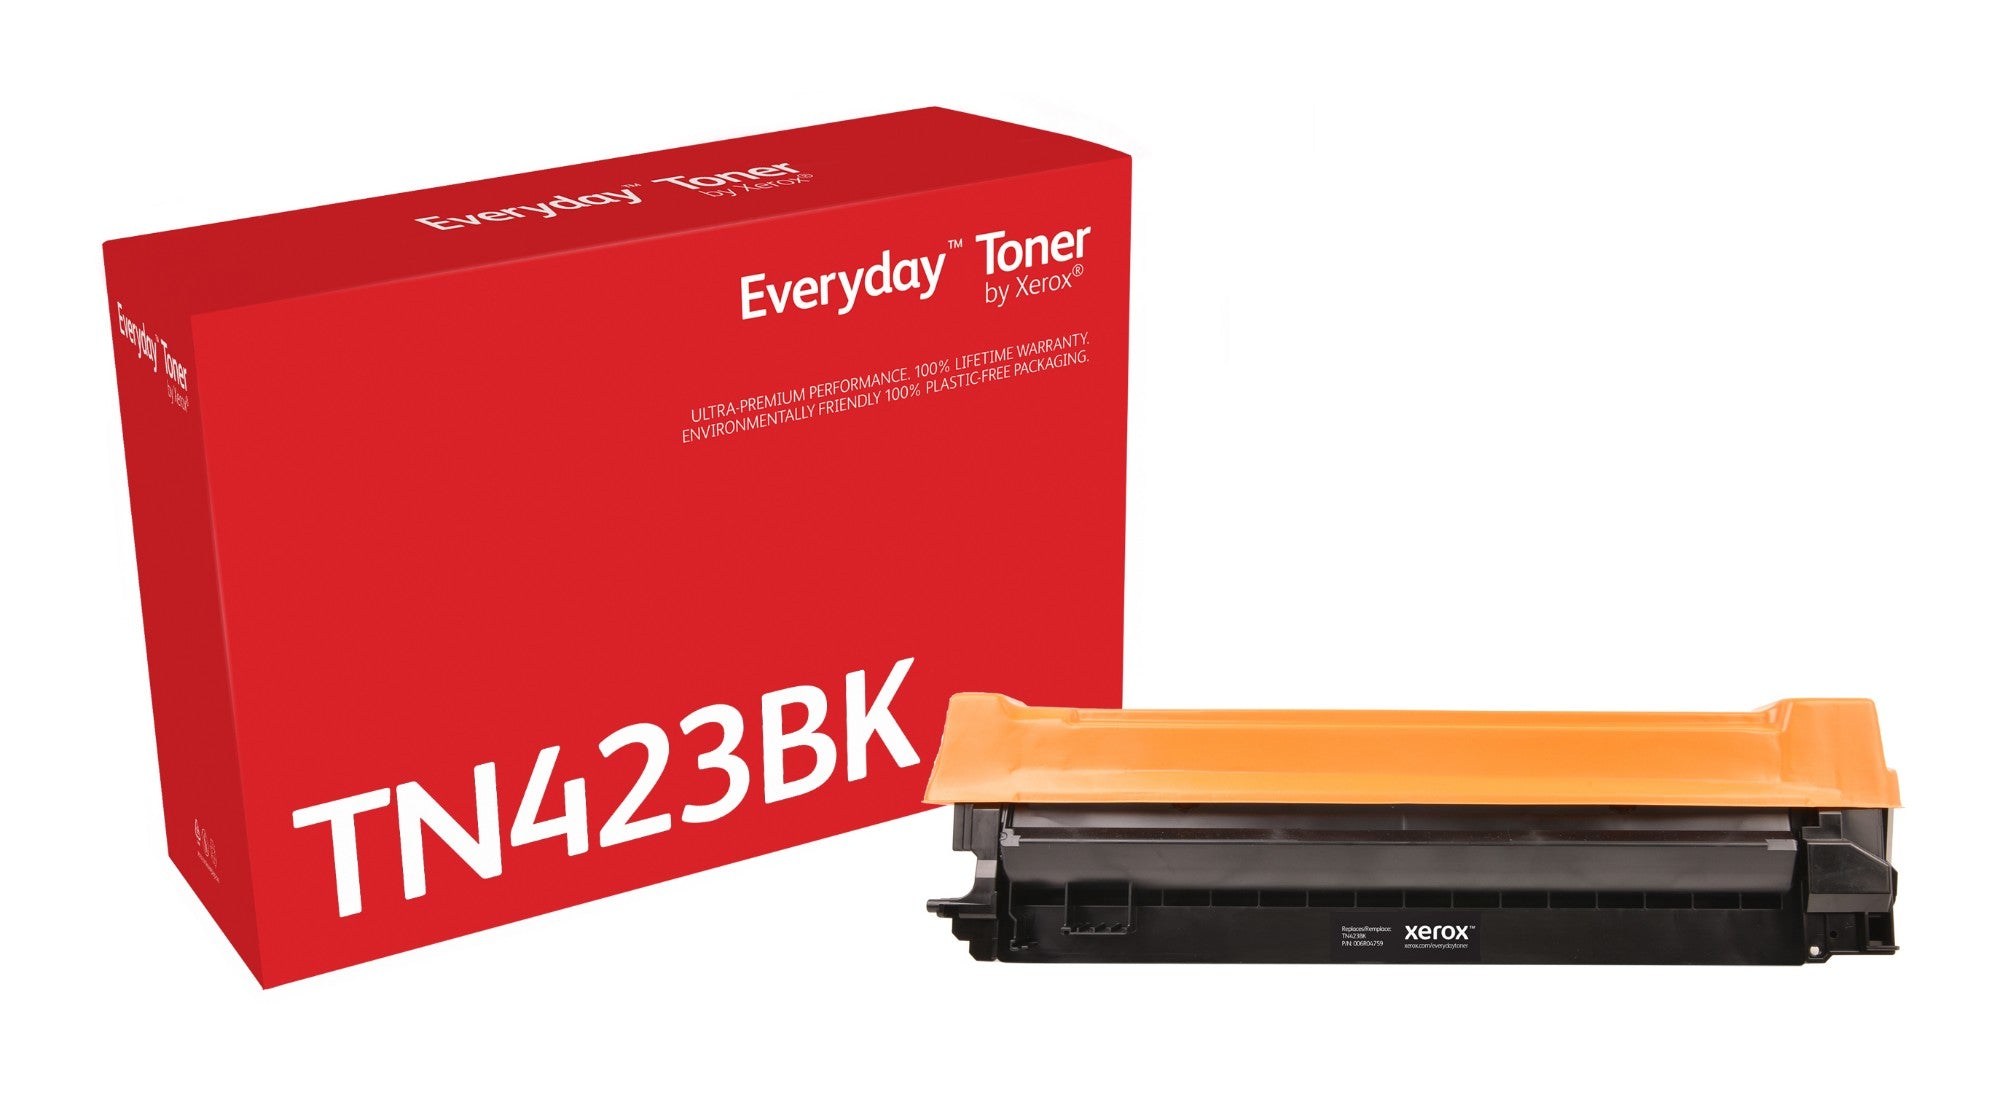 Everyday™ Black Toner by Xerox compatible with Brother TN-423BK